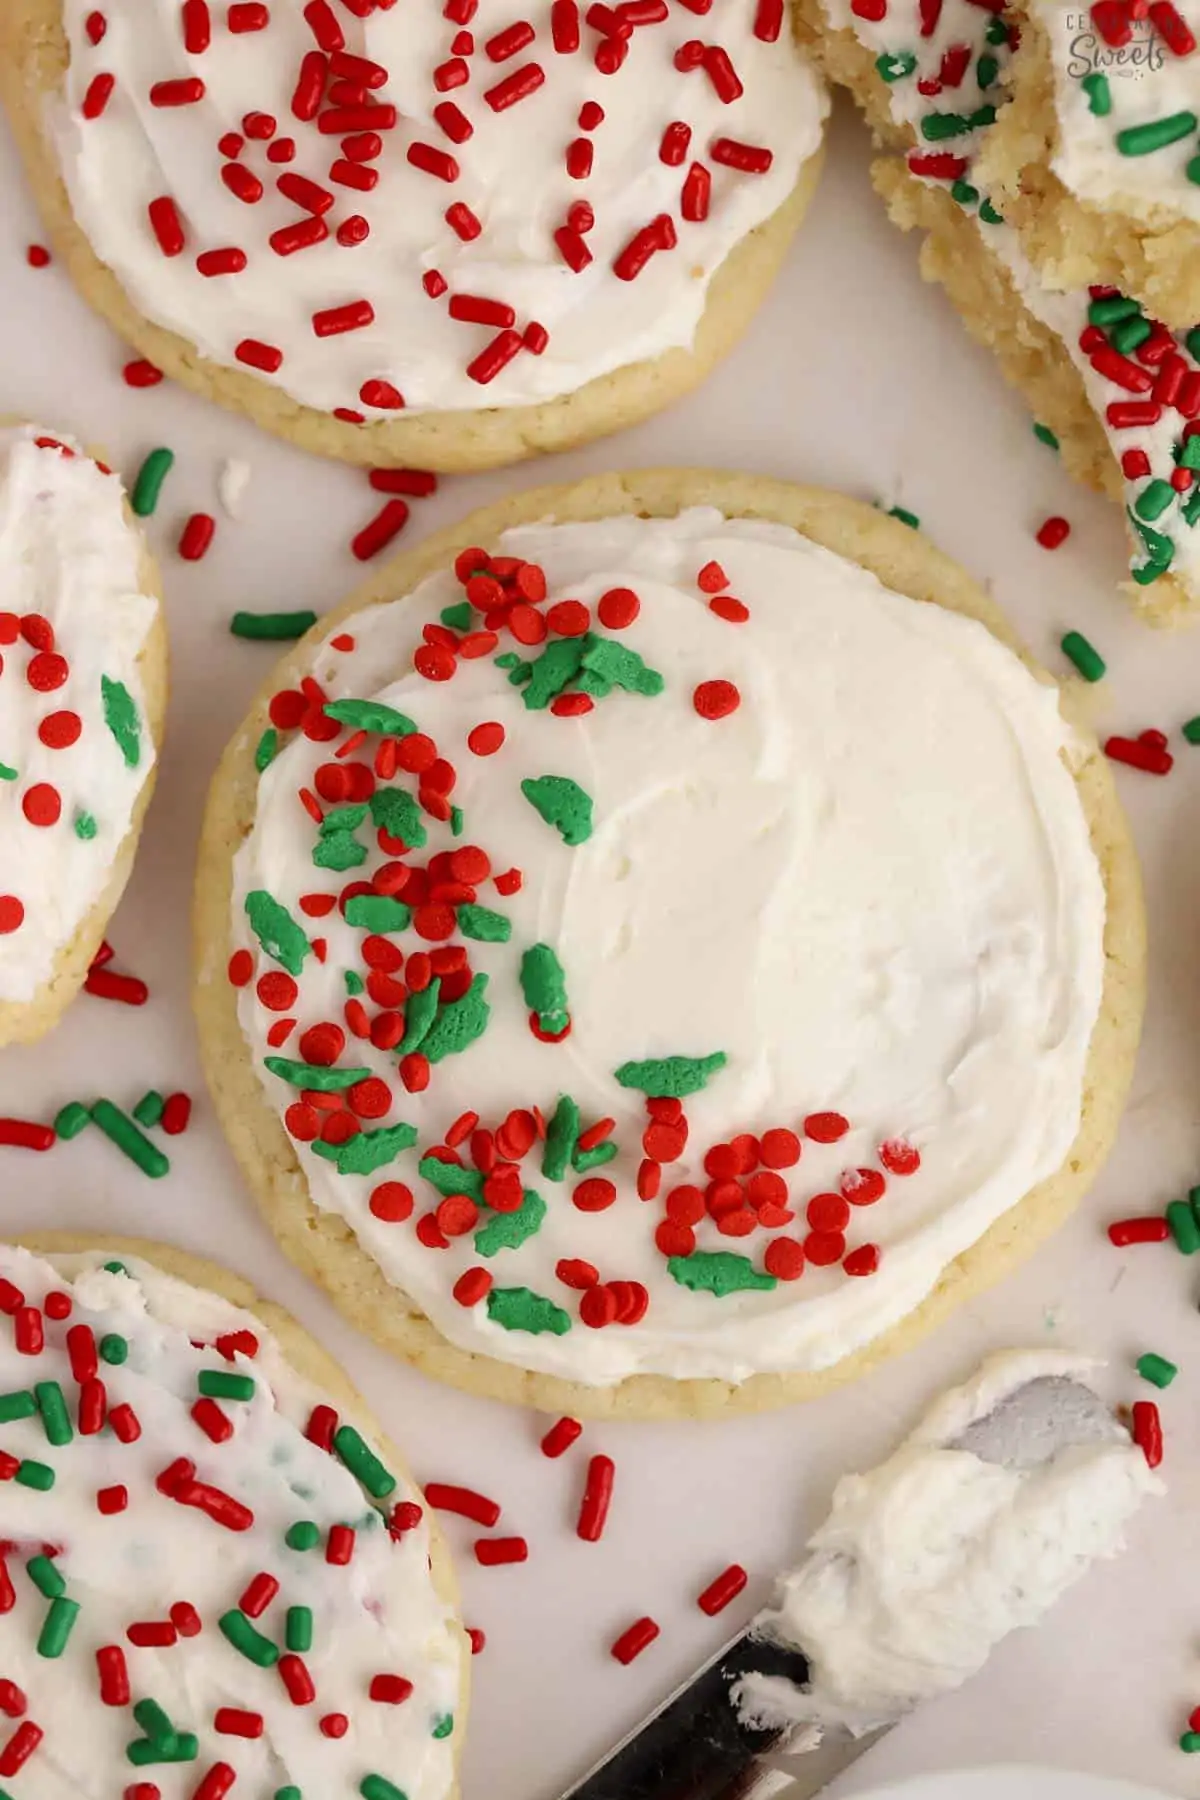 Sugar cookies topped with white frosting and red and green sprinkles.